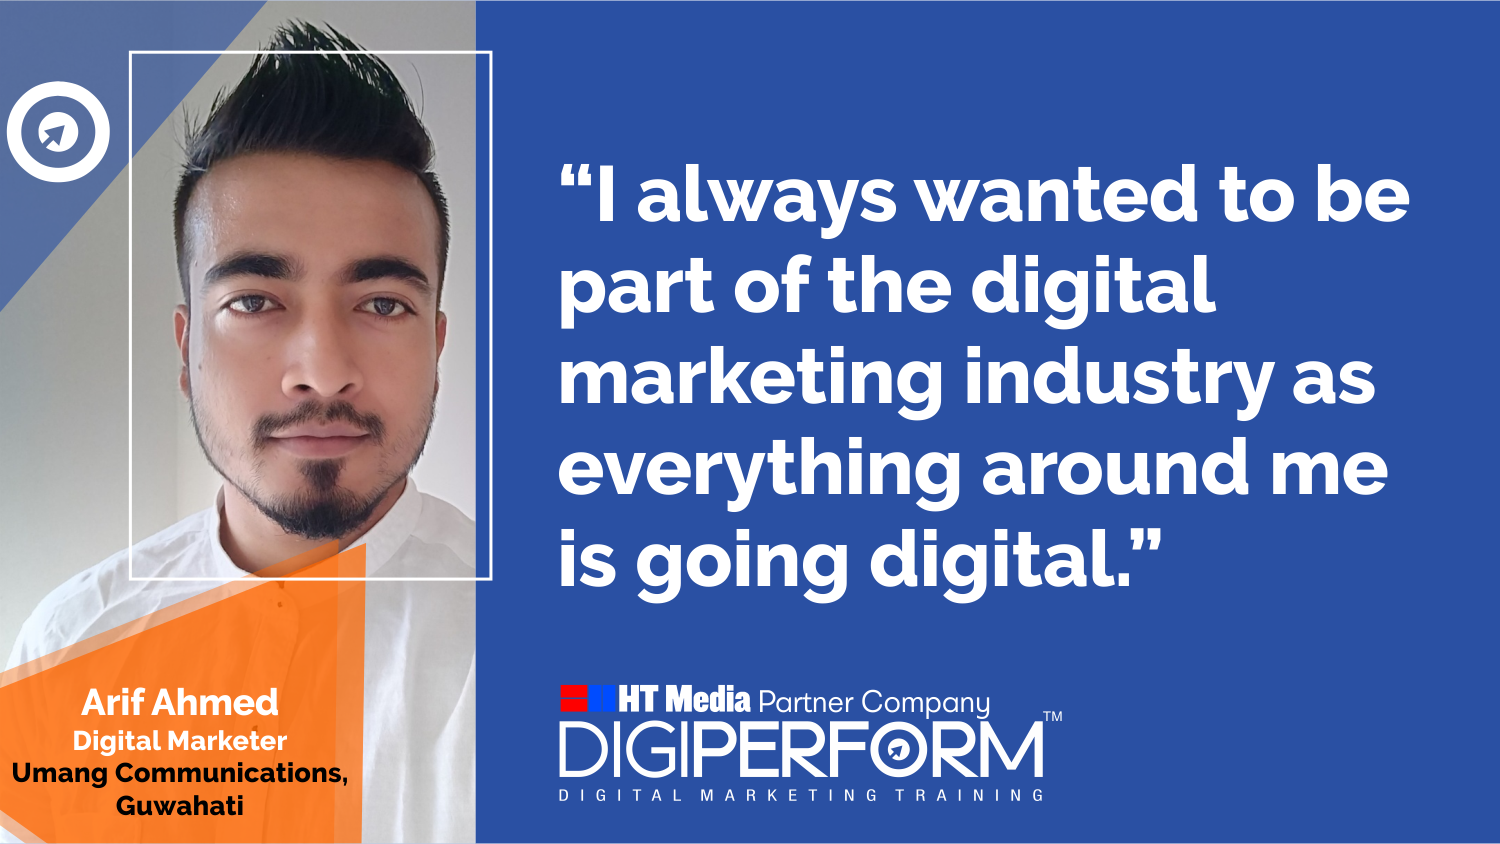 I always wanted to be part of digital marketing industry as everything around me is going digital. – Arif Ahmed